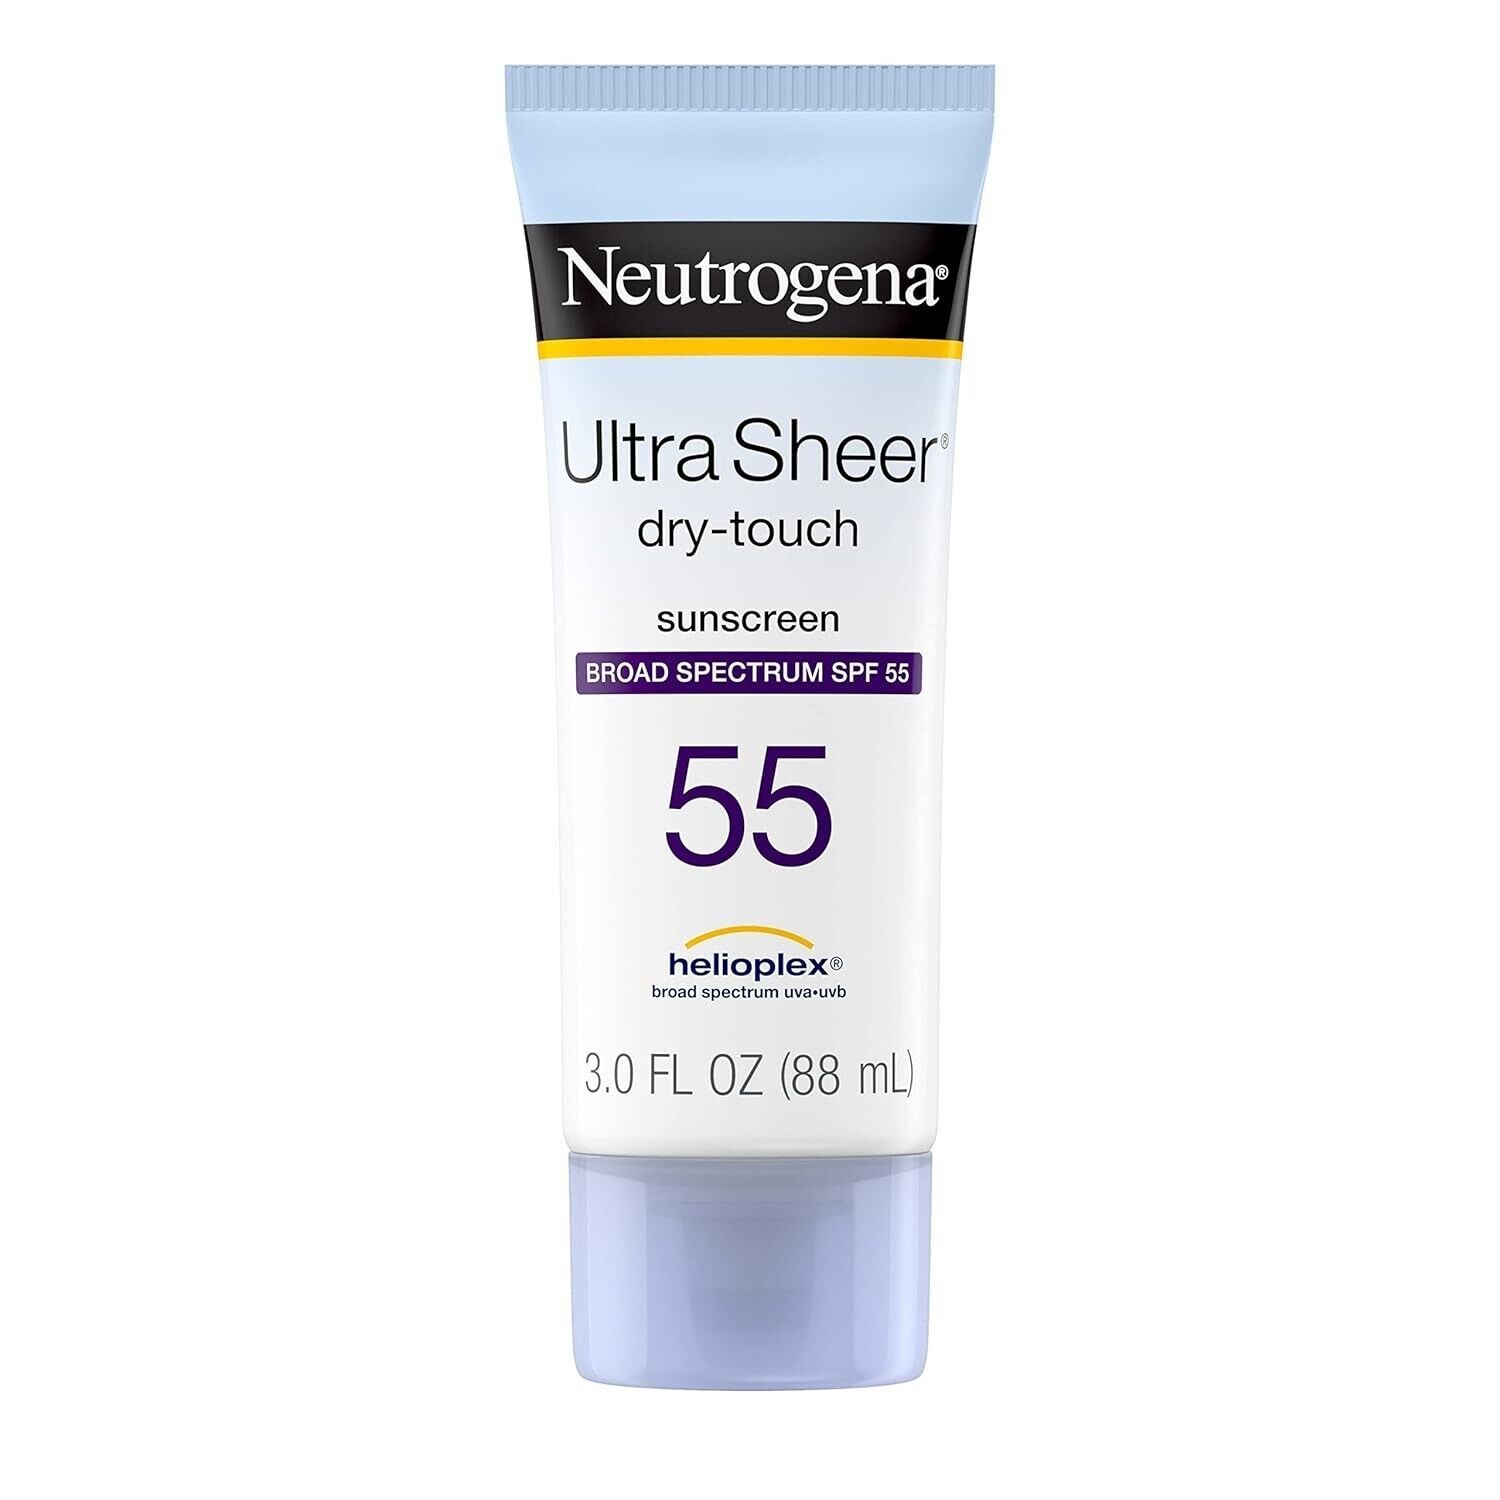 Neutrogena Ultra Sheer Dry-touch Sunscreen Lotion SPF 55 3oz., 3 Pack - $30.84